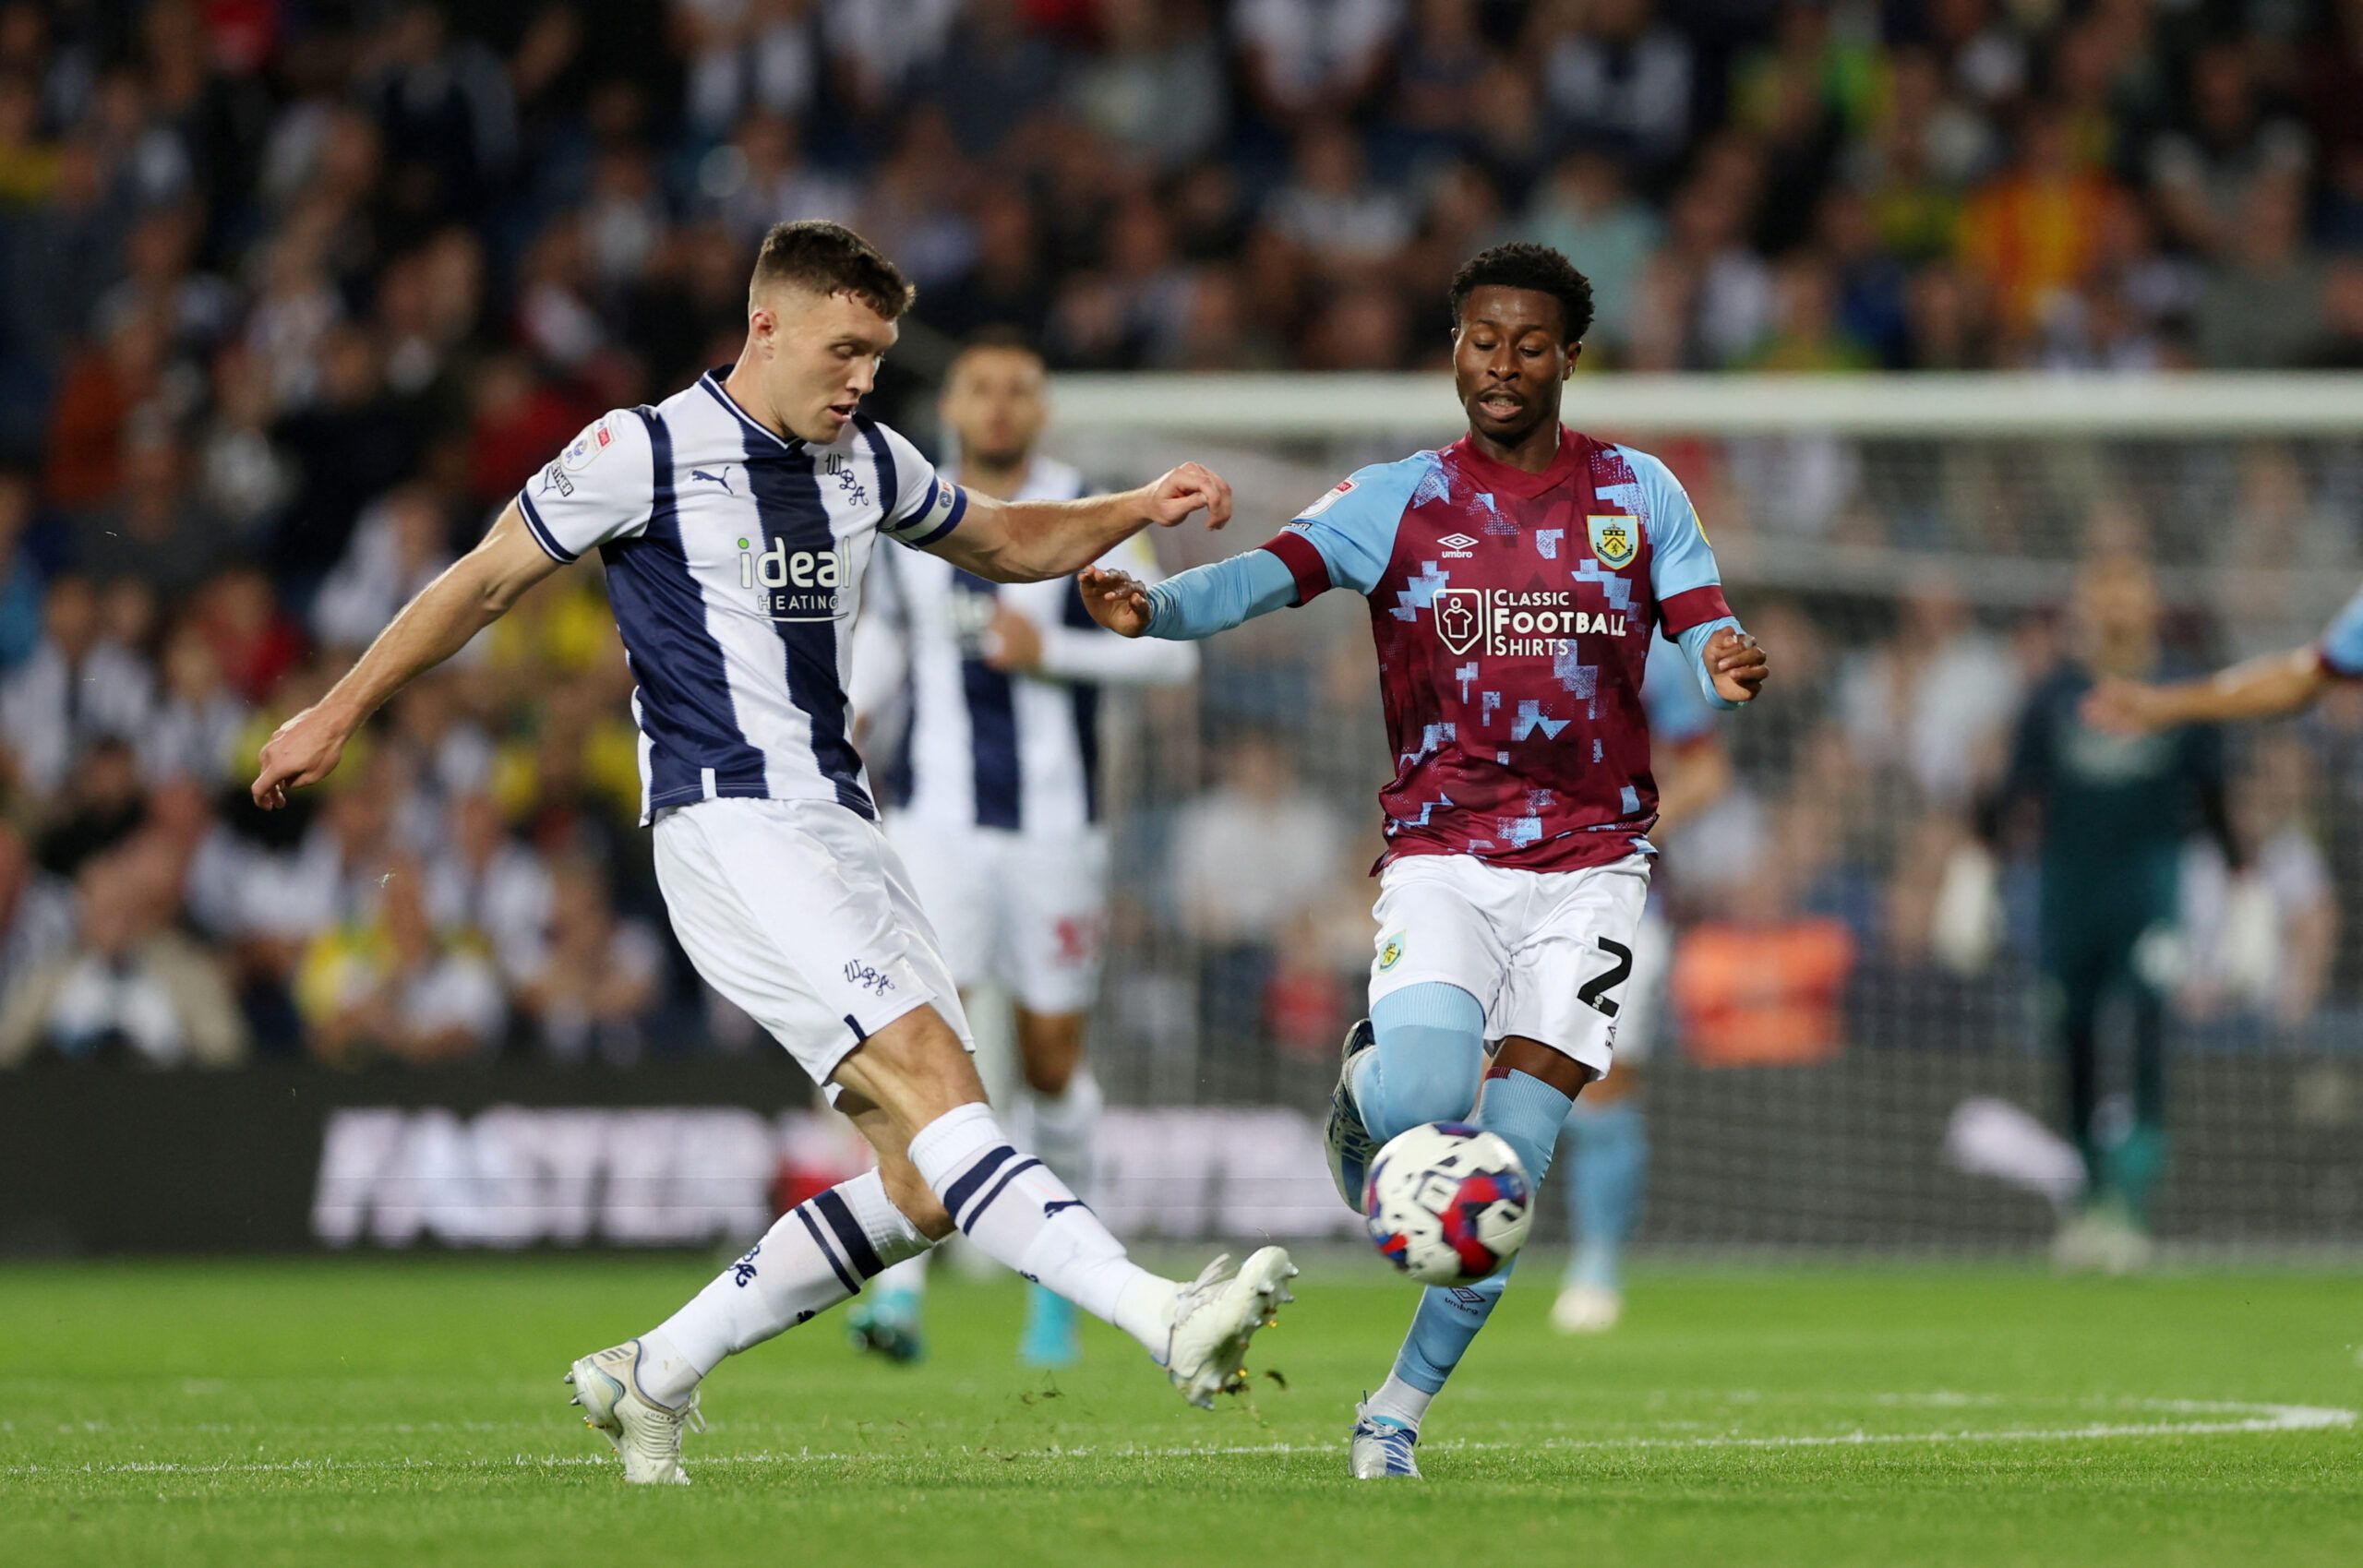 Soccer Football - Championship - West Bromwich Albion v Burnley - The Hawthorns, West Bromwich, Britain - September 2, 2022 West Bromwich Albion's Dara O'Shea in action with Burnley's Nathan Tella   Action Images/Matthew Childs  EDITORIAL USE ONLY. No use with unauthorized audio, video, data, fixture lists, club/league logos or 